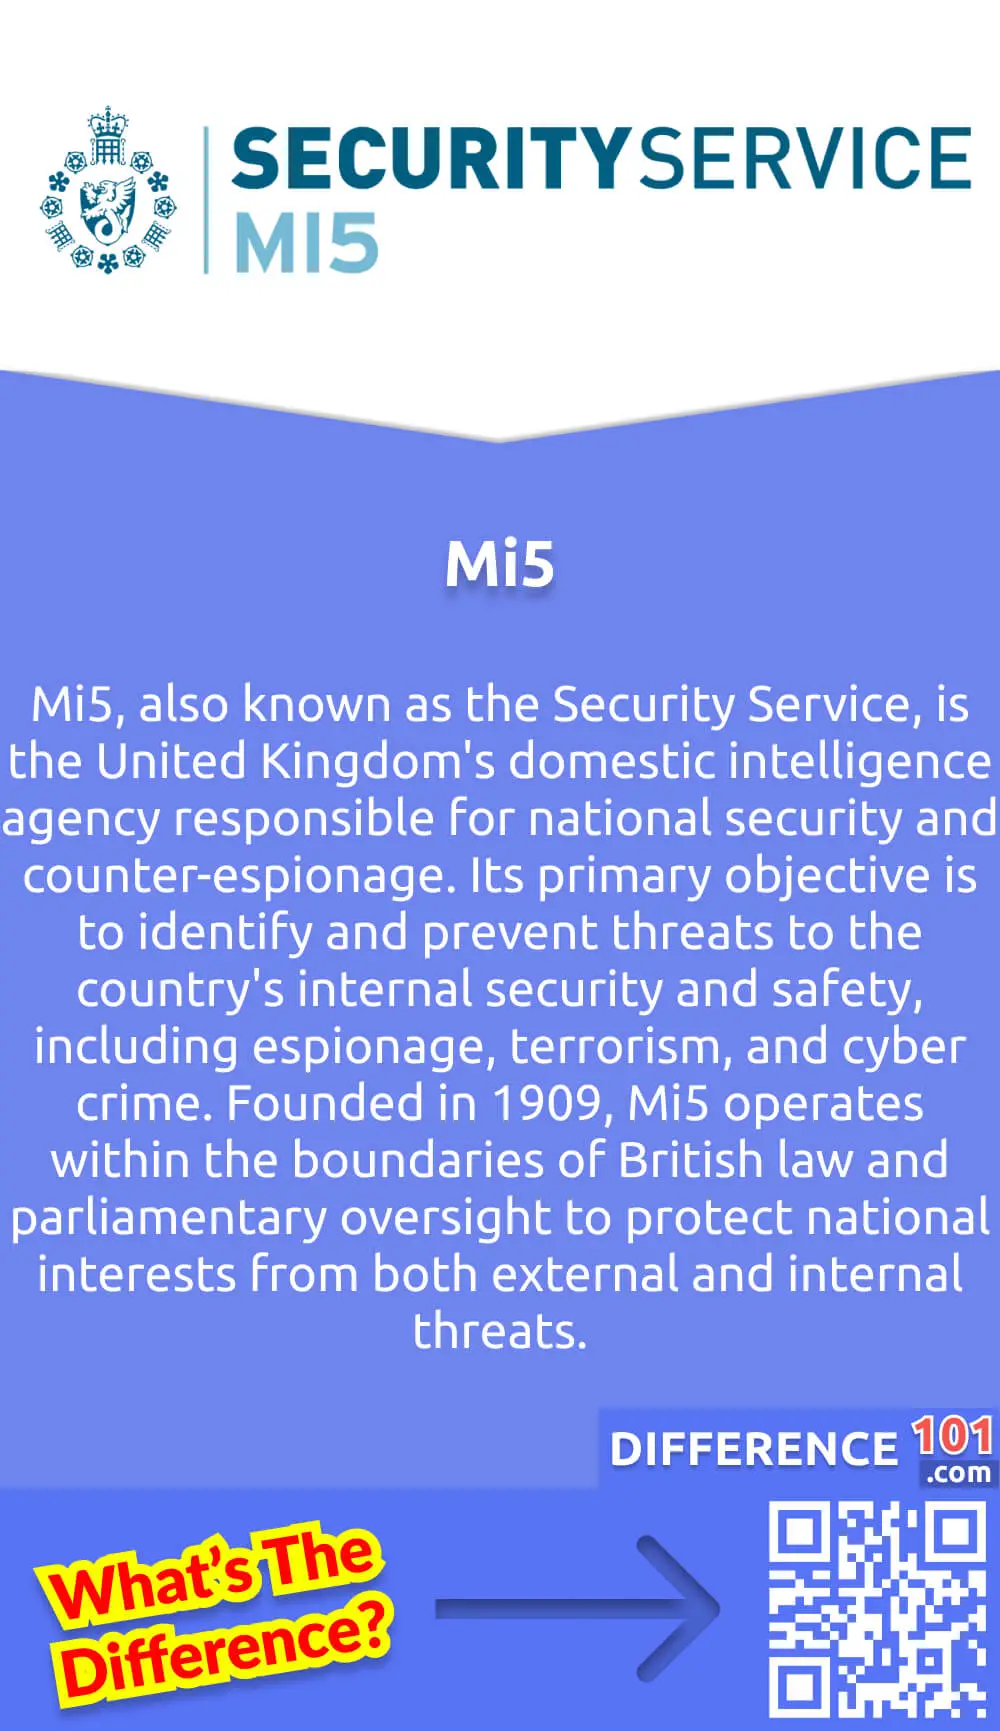 What Is Mi5? Mi5, also known as the Security Service, is the United Kingdom's domestic intelligence agency responsible for national security and counter-espionage. Its primary objective is to identify and prevent threats to the country's internal security and safety, including espionage, terrorism, and cyber crime. Founded in 1909, Mi5 operates within the boundaries of British law and parliamentary oversight to protect national interests from both external and internal threats. Its work is highly classified, and its agents operate both in the UK and overseas to gather intelligence, analyze threats, and provide actionable information to government decision-makers. Through its vigilance and effectiveness, Mi5 plays a vital role in safeguarding the United Kingdom's security and its citizens.
